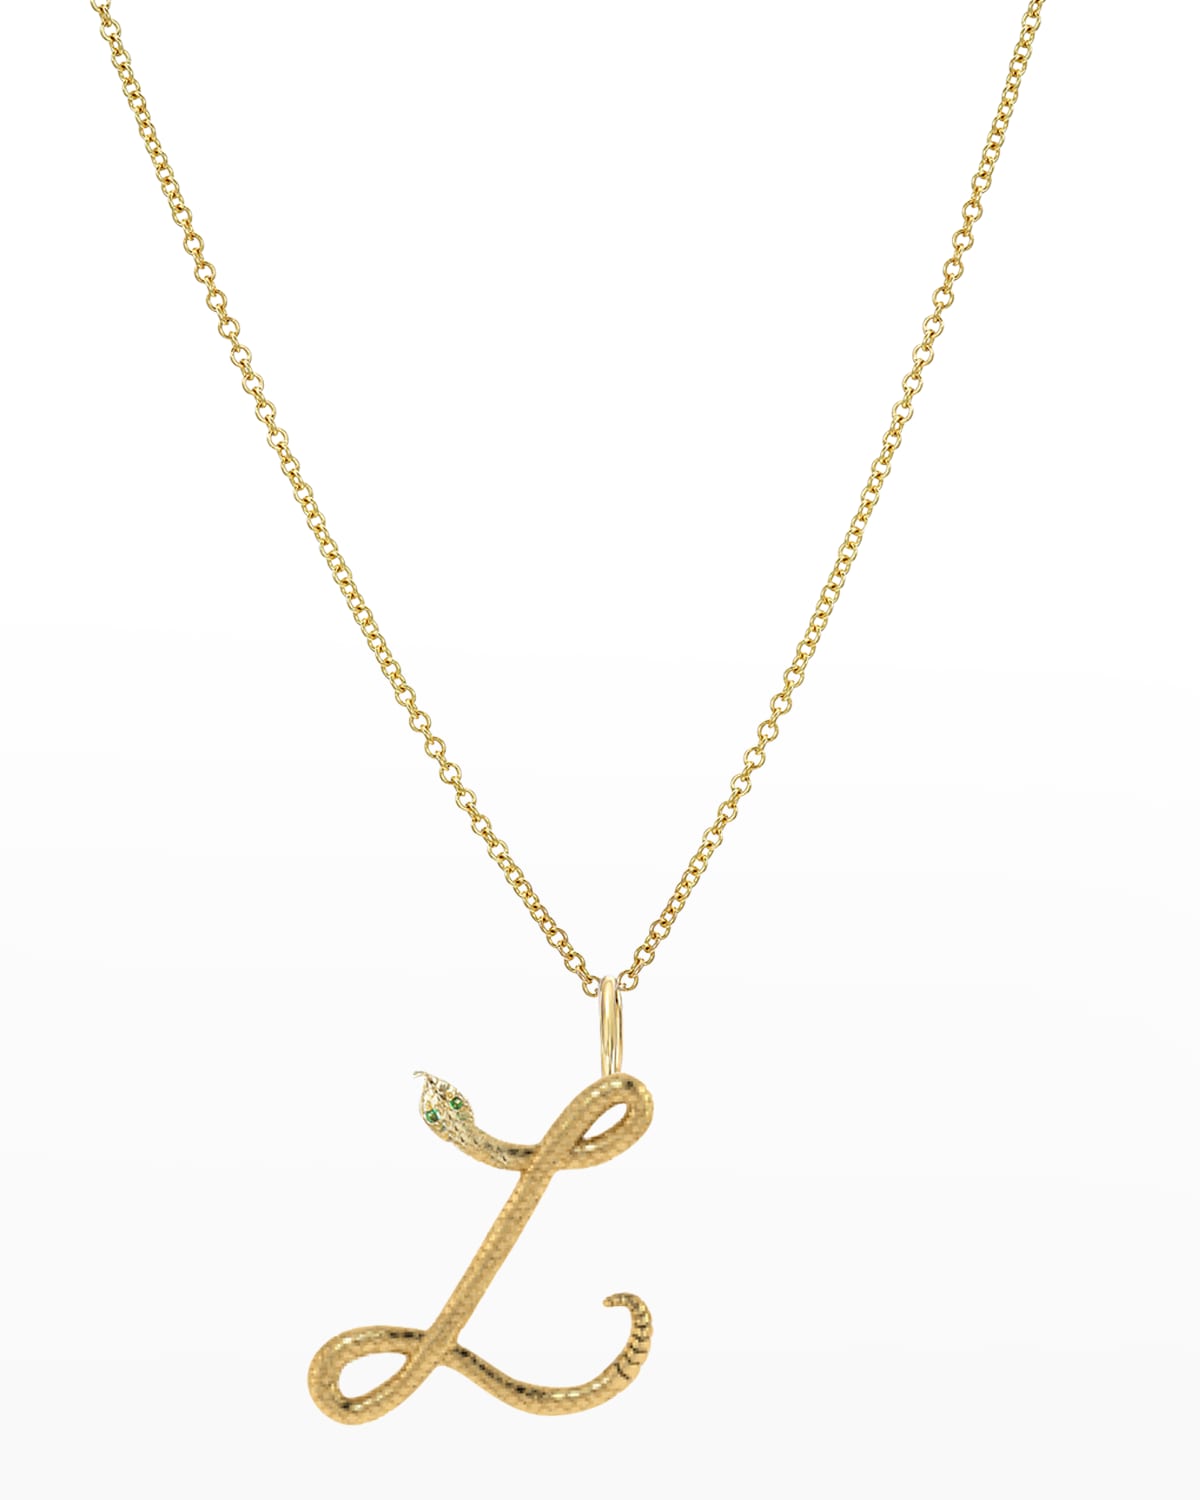 Zoe Lev Jewelry 14k Gold Snake Initial Necklace In L